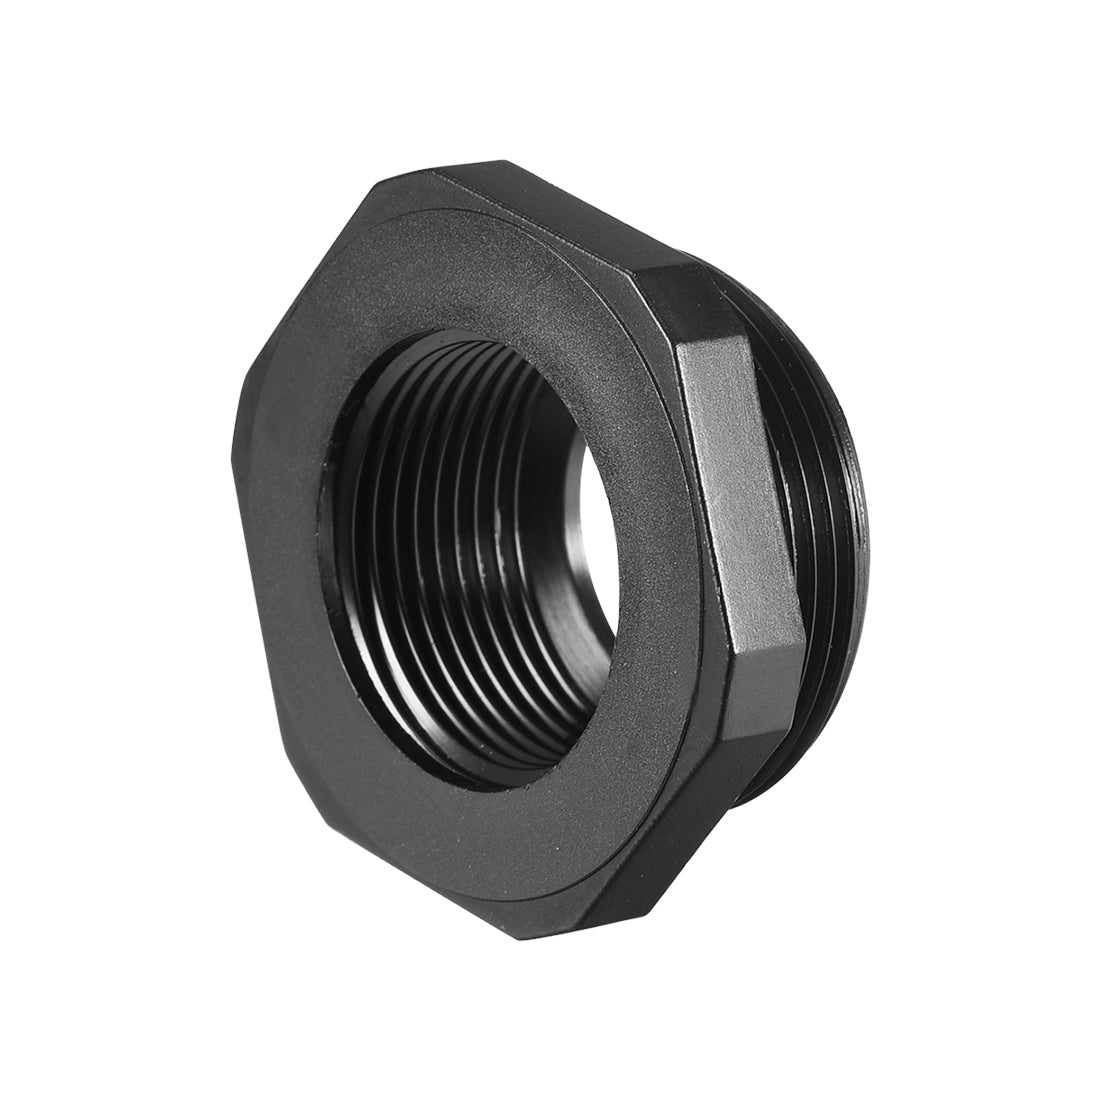 uxcell Uxcell Threaded Reducing Bushings Nylon Connector Adaptor M32 Male Thread to M25 Female Thread Black